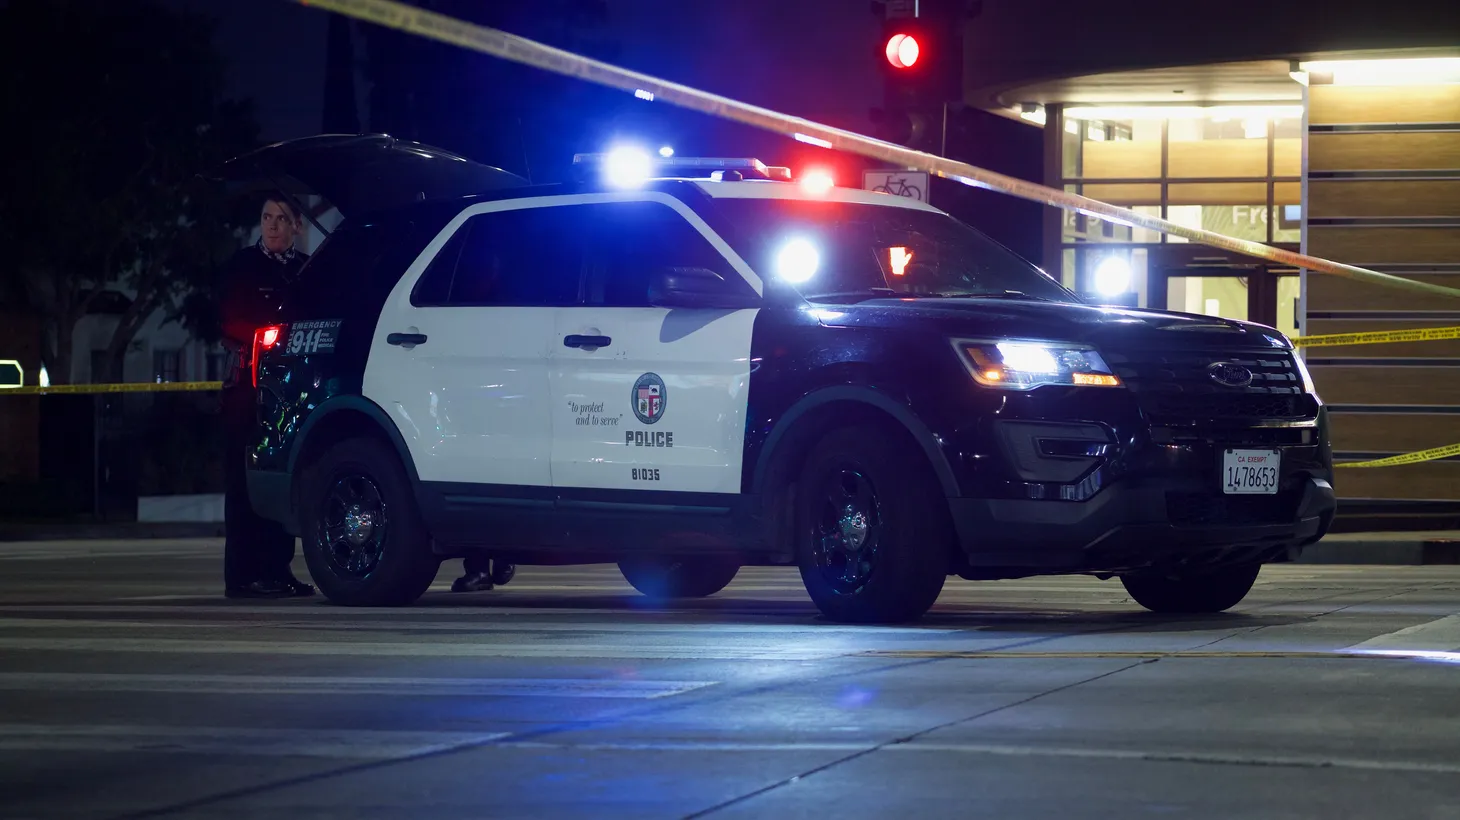 A Los Angeles Police Dept. car blocks Sunset Blvd. following a fatal officer-involved shooting, April 24, 2021.